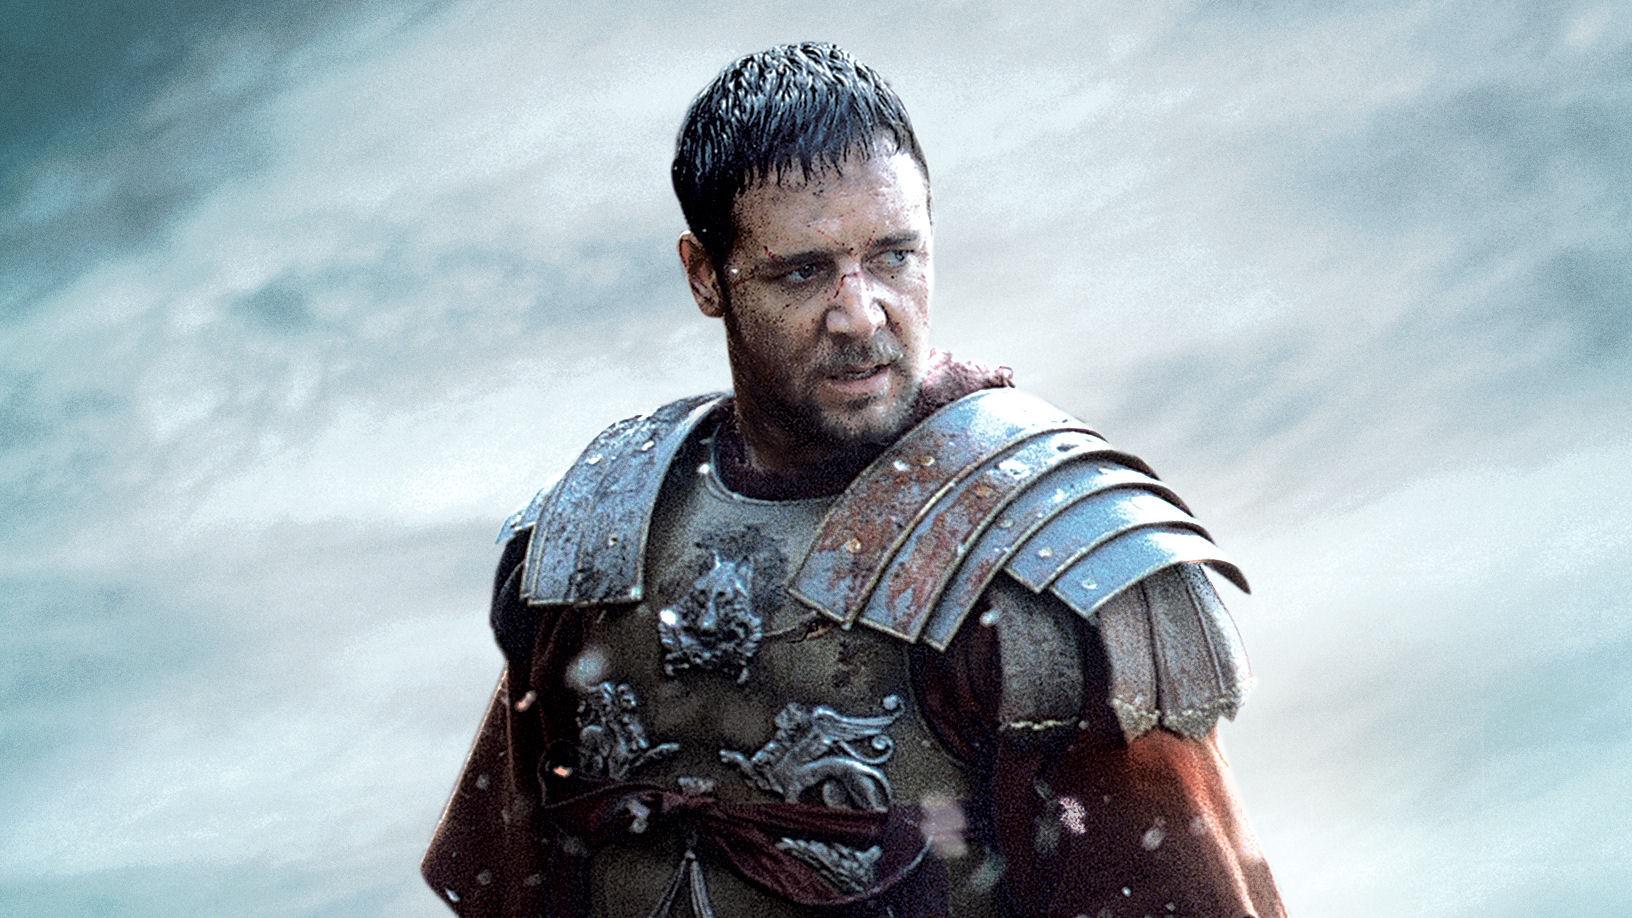 2000-Gladiator-Russell-Crowe-e1396324984840